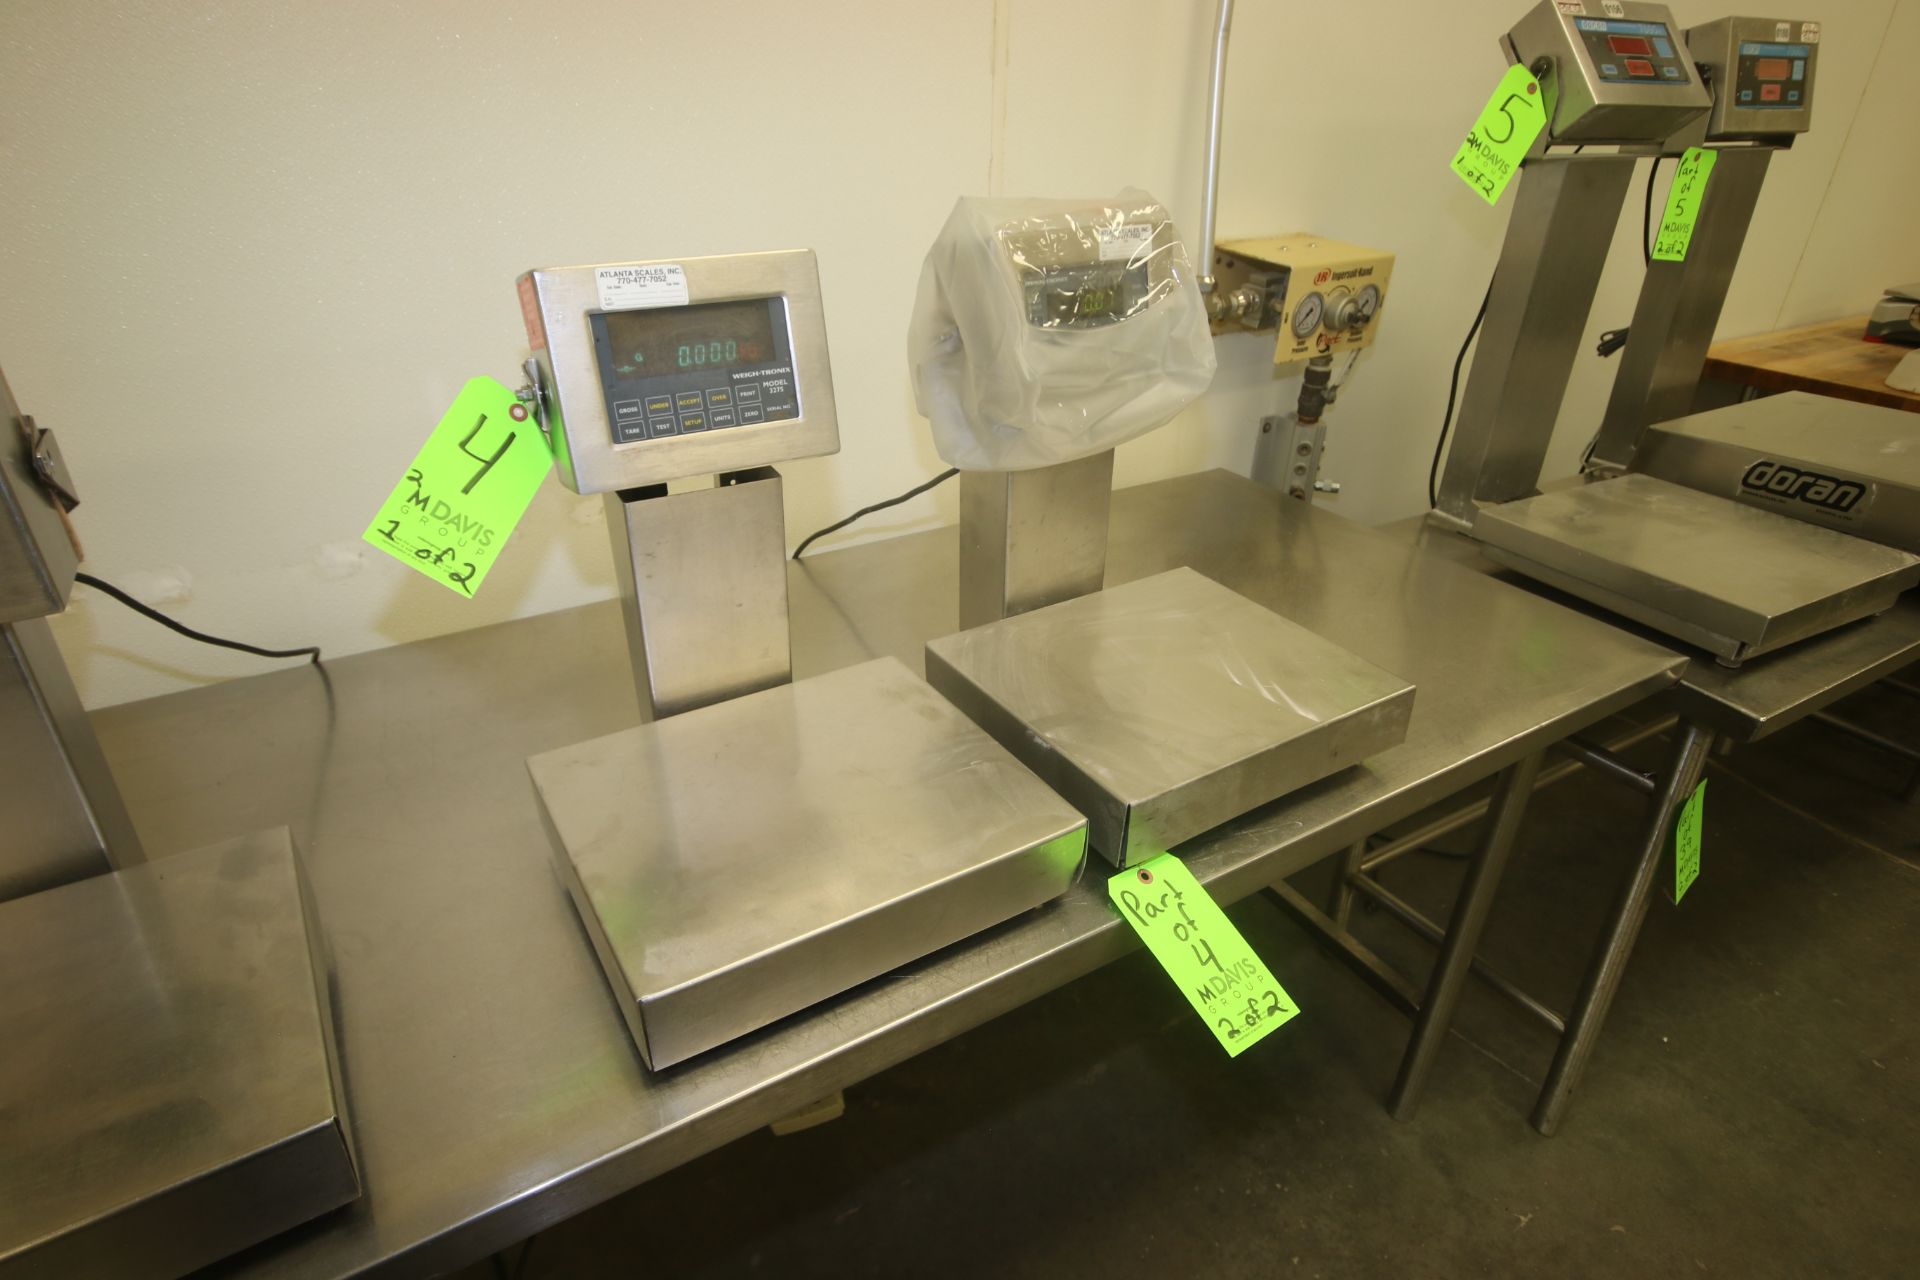 Weigh-Tronix S/S Platform Scales, M/N QC-3265 & 3275, with Aprox. 13-1/2" L x 12" W S/S Platforms,